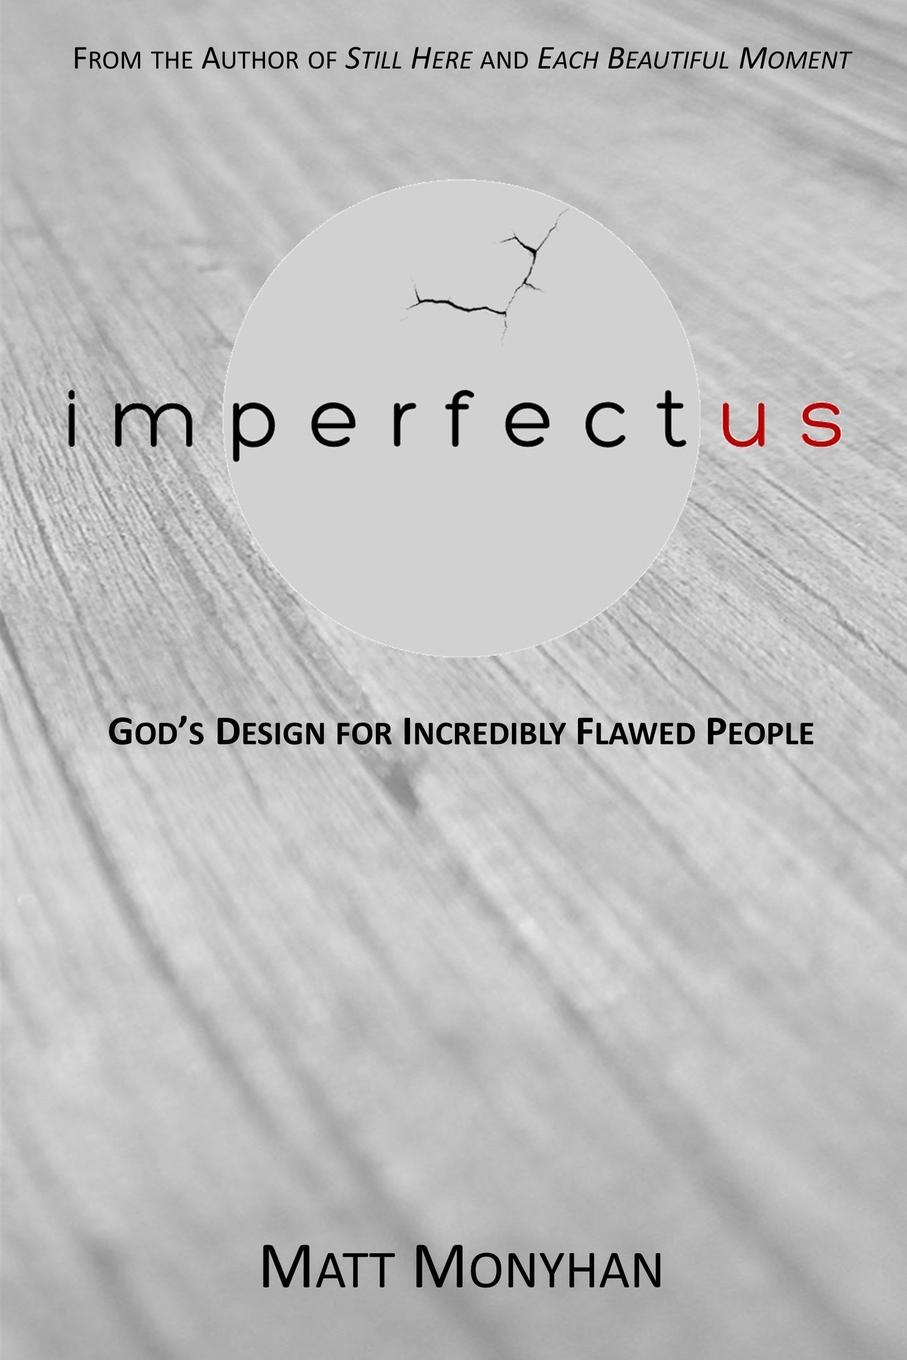 IMPERFECTUS. God.s Design for Incredibly Flawed People